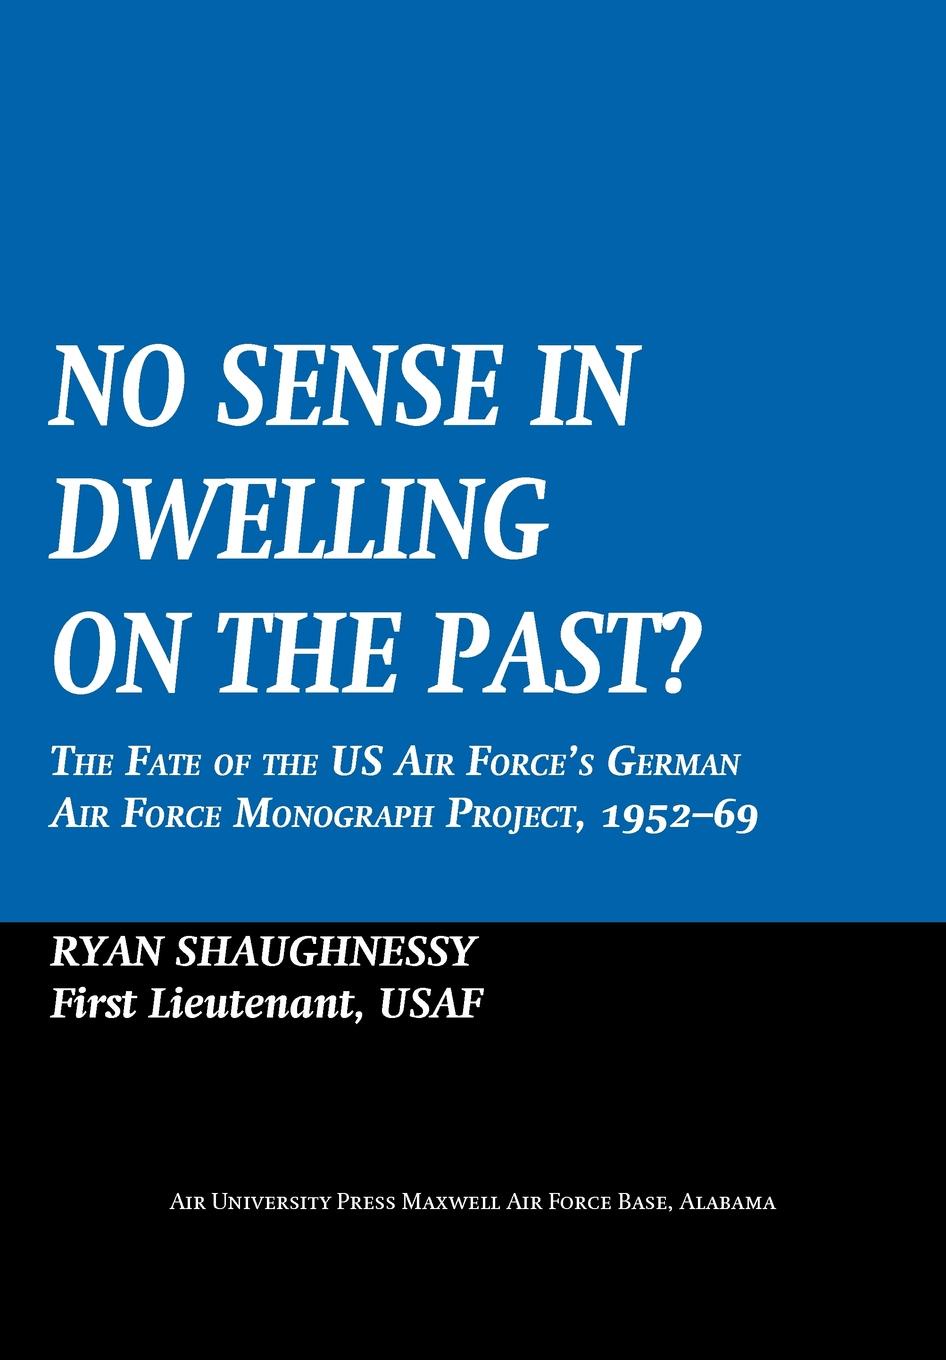 Ryan Shaughnessy, Air University Press No Sense Dwelling in the Past. The Fate of the US Air Force.s German Air Force Monograph Project, 1952-1969